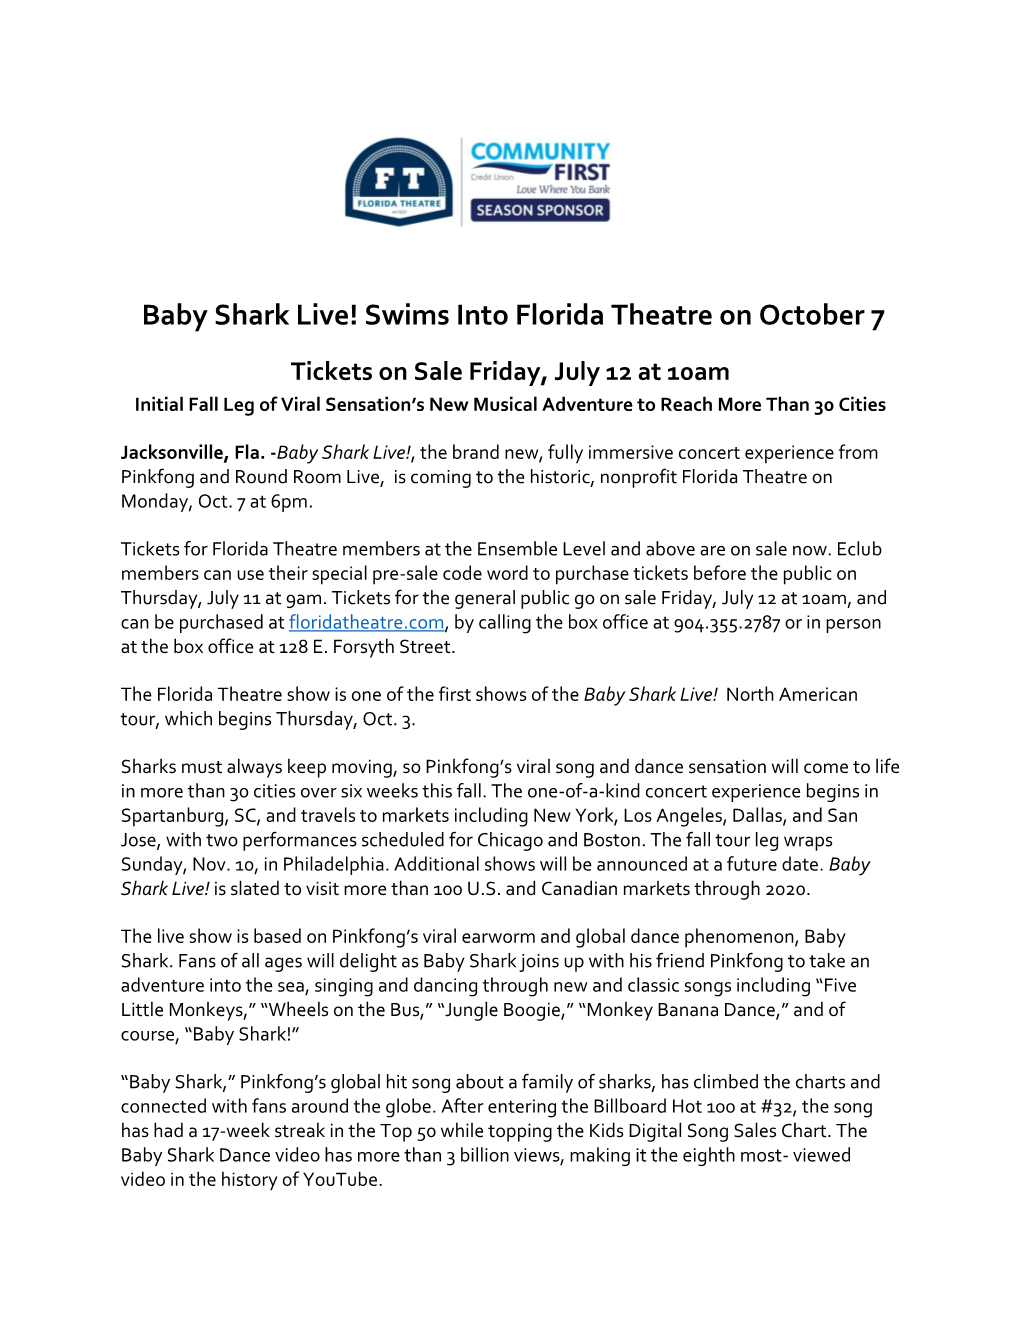 Baby Shark Live! Swims Into Florida Theatre on October 7